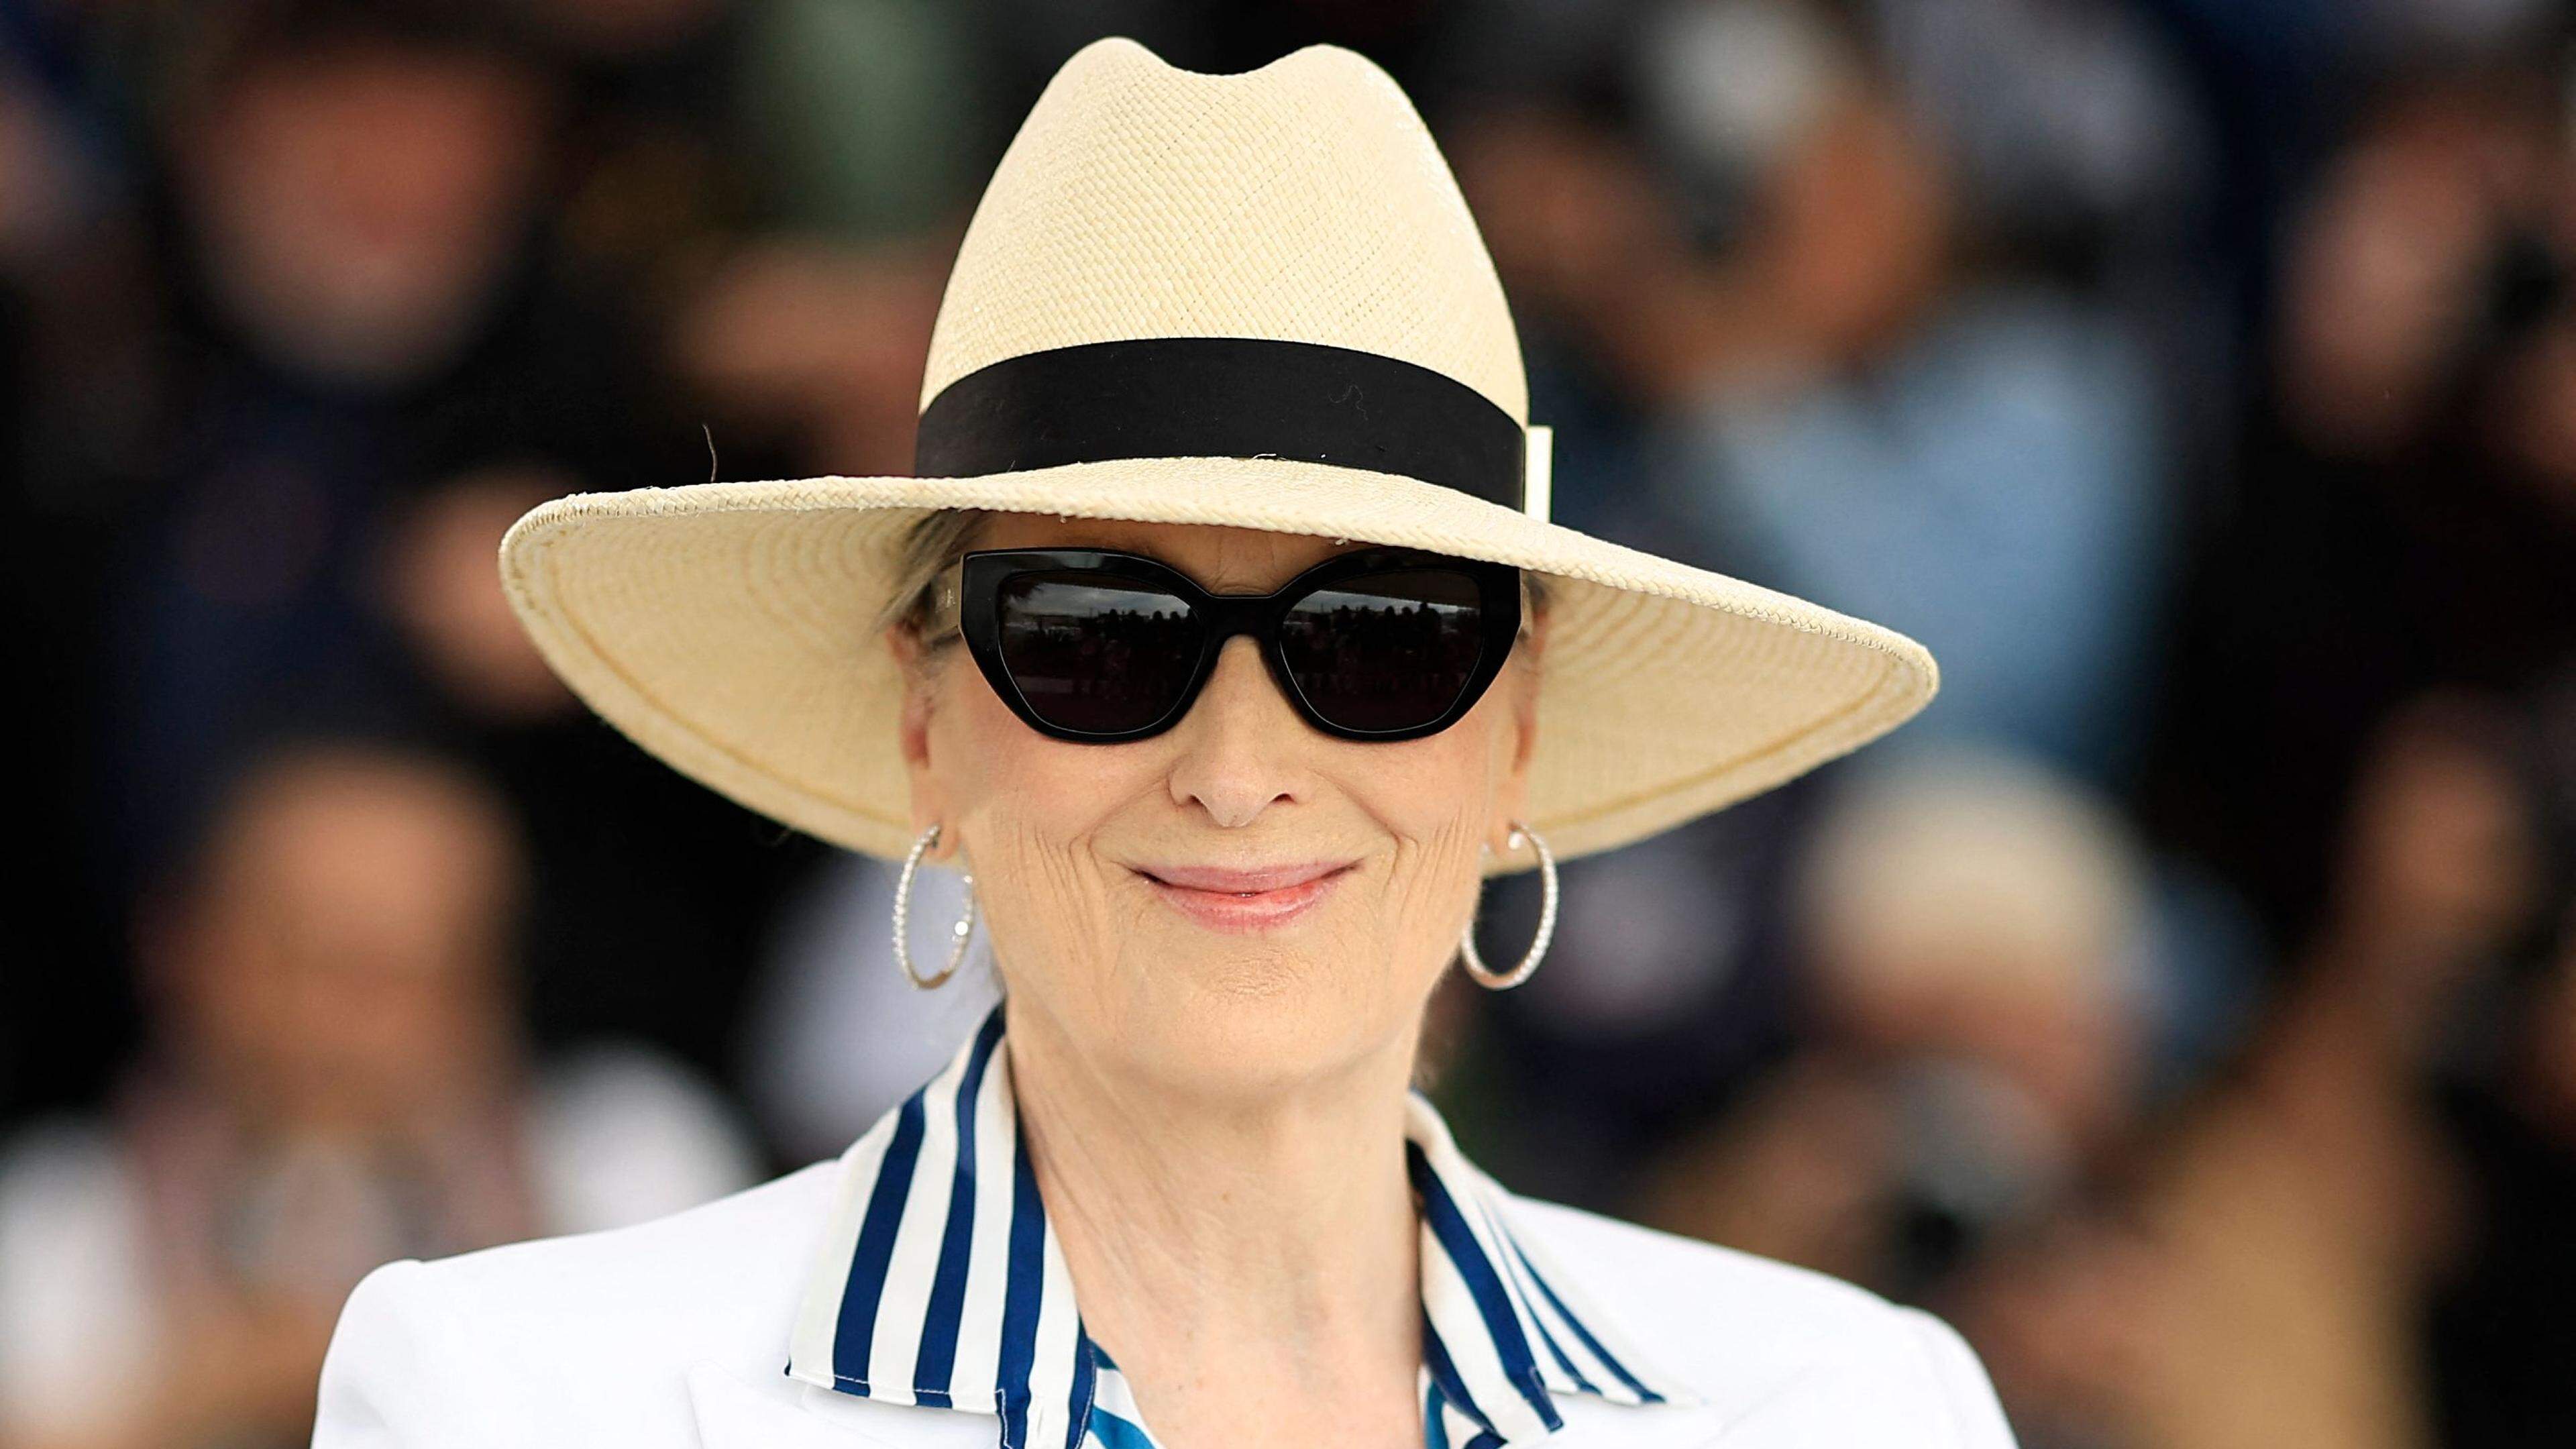 US actress Meryl Streep poses during a photocall before receiving the Honorary Palme d'Or at the 77th edition of the Cannes Film Festival in Cannes, southern France, on May 14, 2024. (Photo by Valery HACHE / AFP)